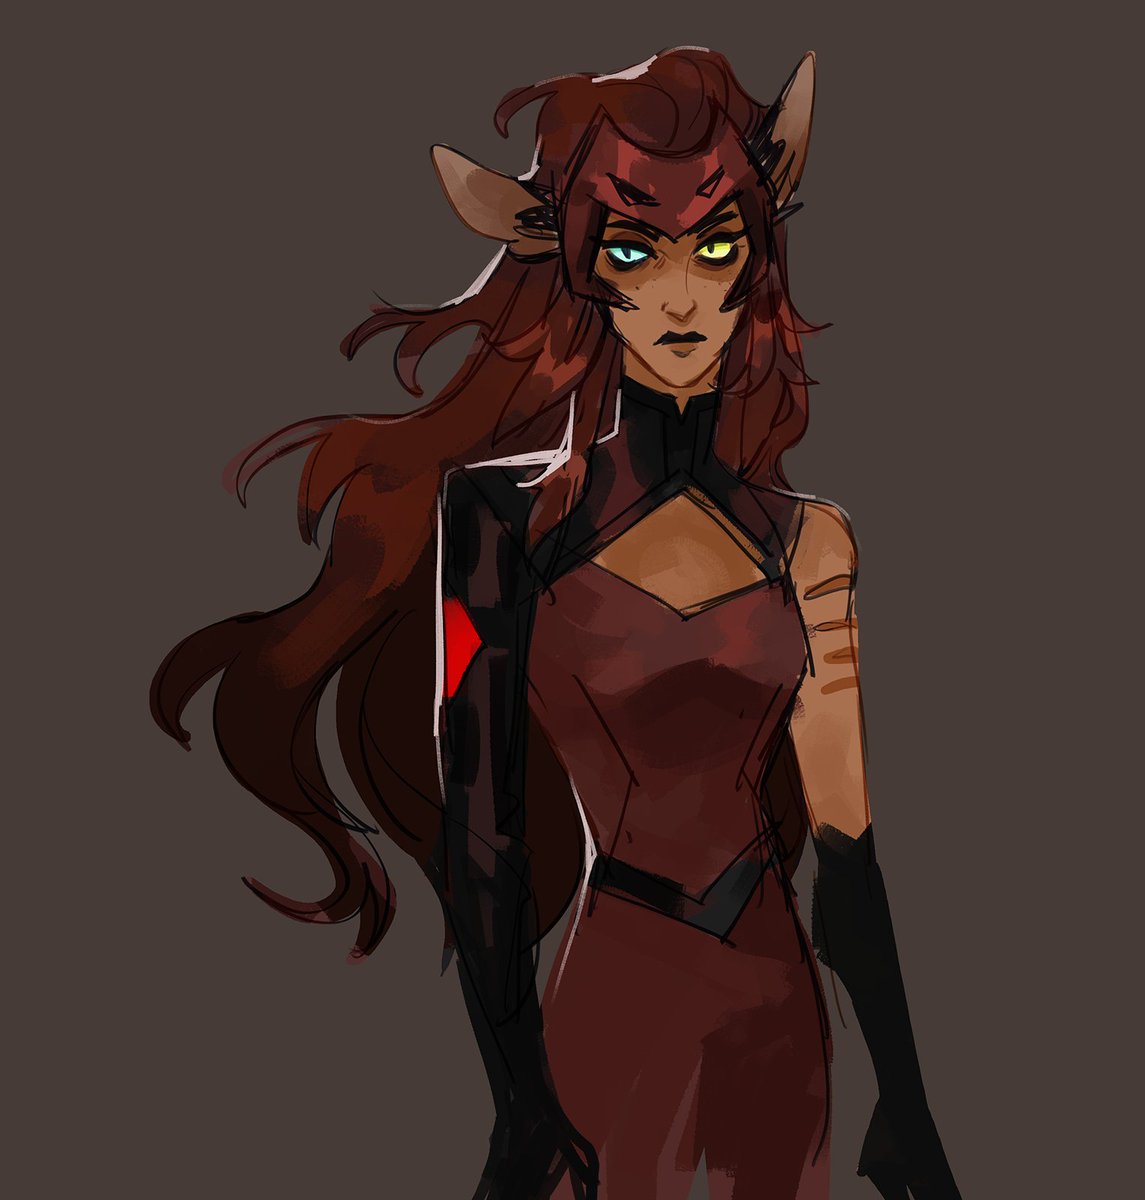 RT @wheatskers: This was to test out a new brush I made but it's been a hot minute since I drew Catra https://t.co/ow9StoV955